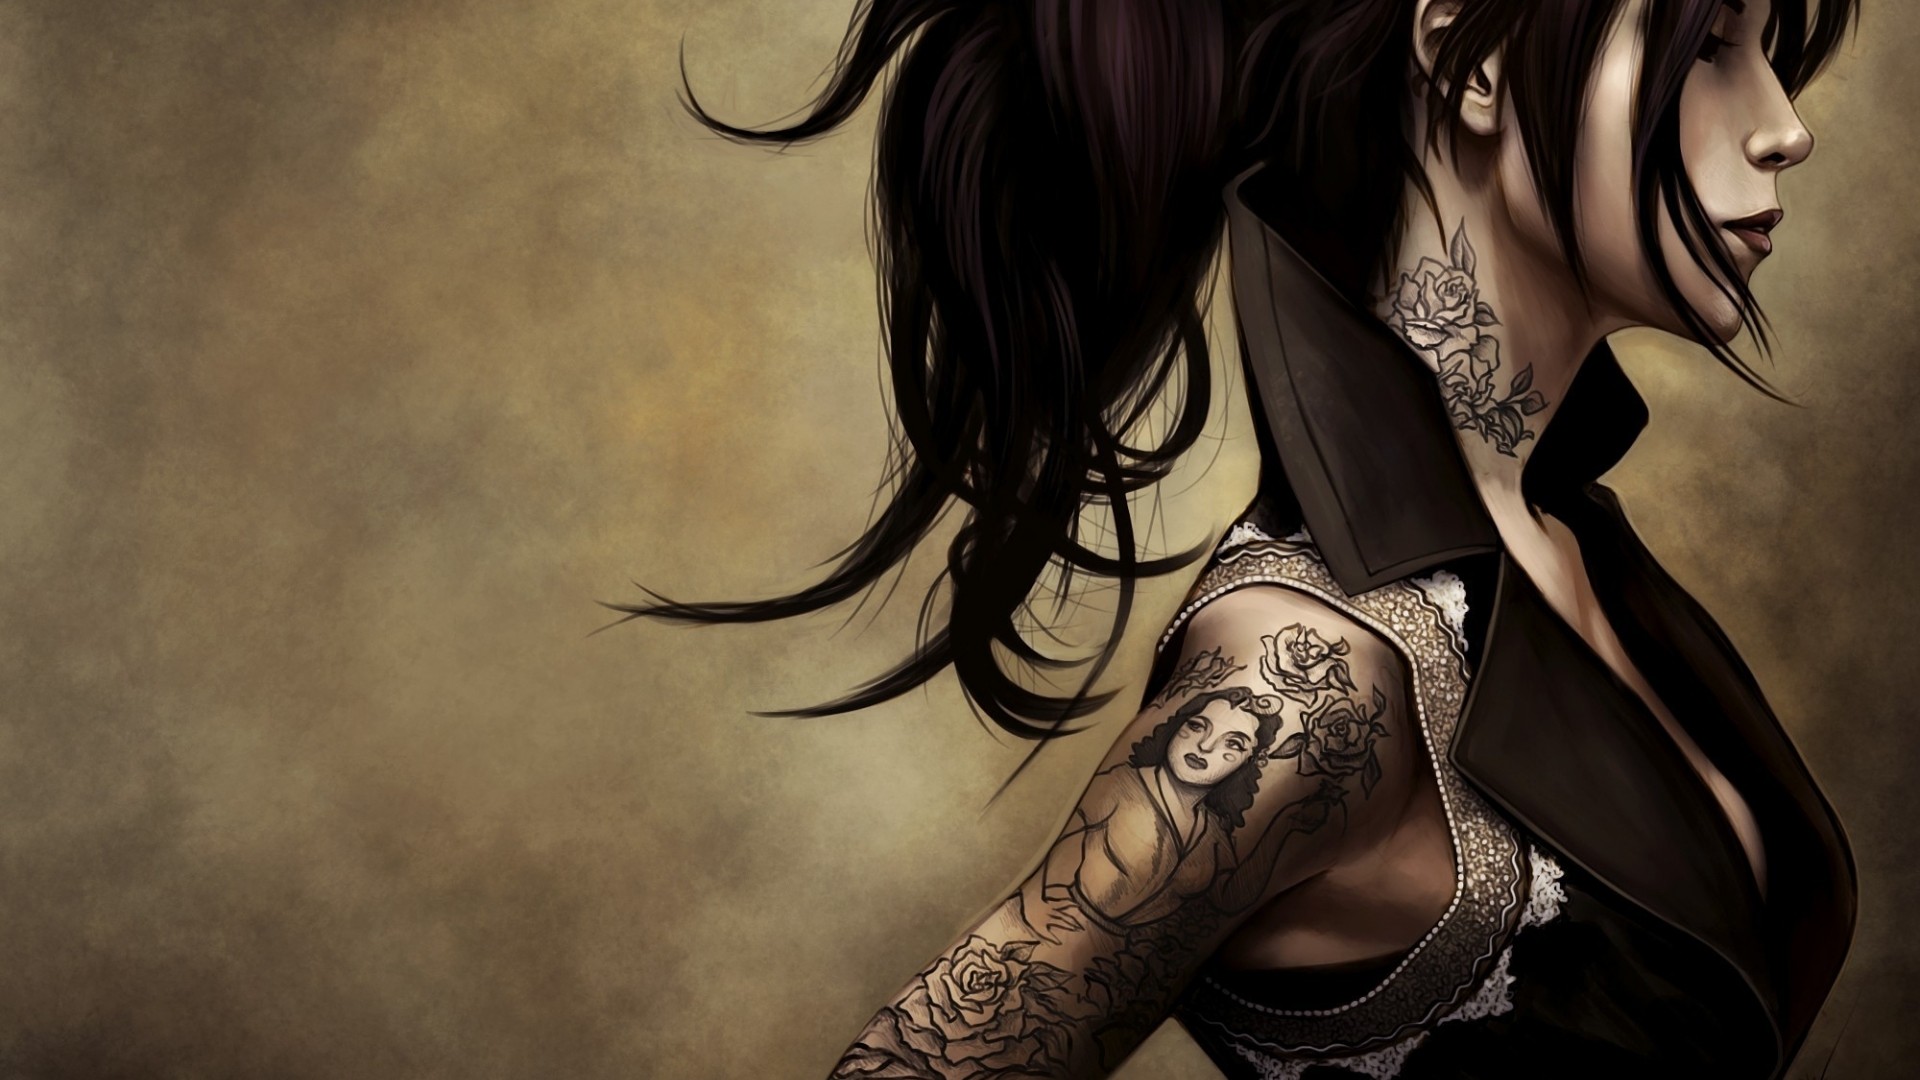 Old School Tattoo Background Stock Photo, Picture and Royalty Free Image.  Image 125204591.